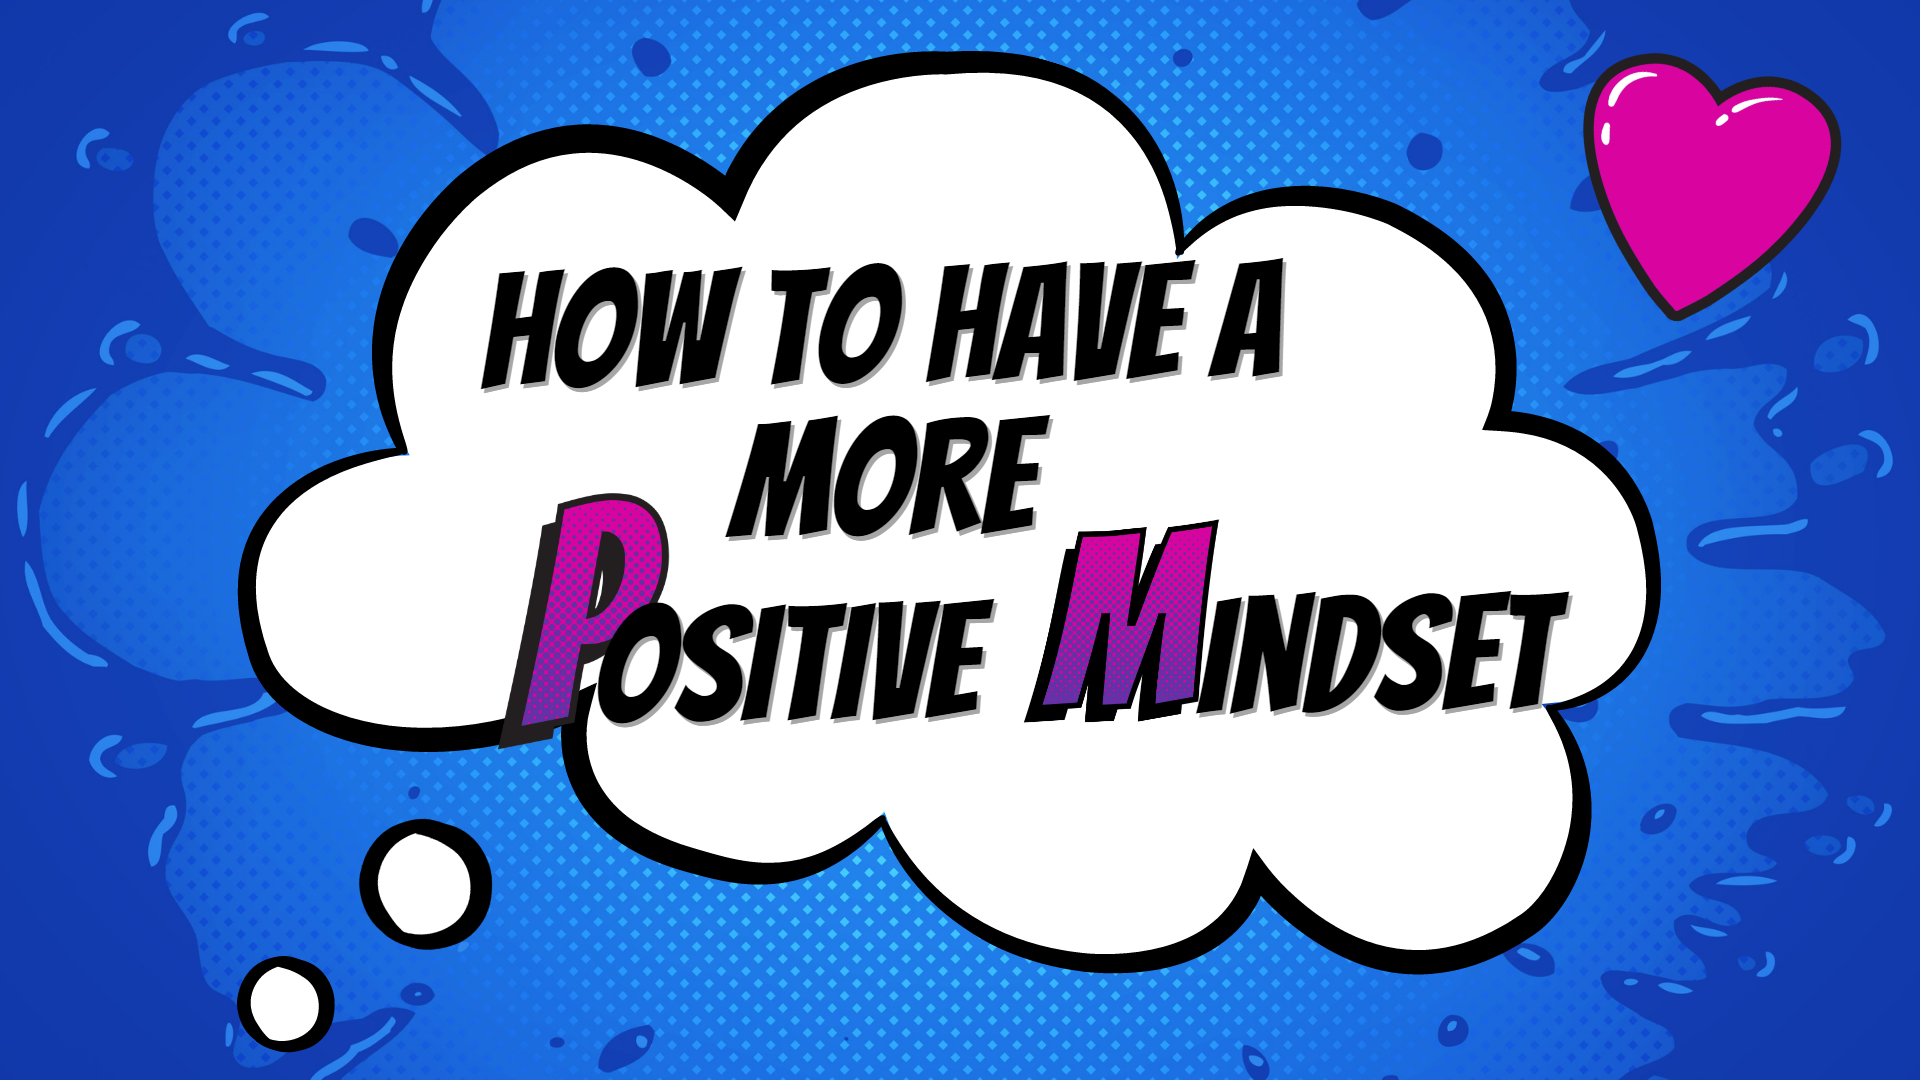 5 Simple Ways to Have a More Positive Mindset